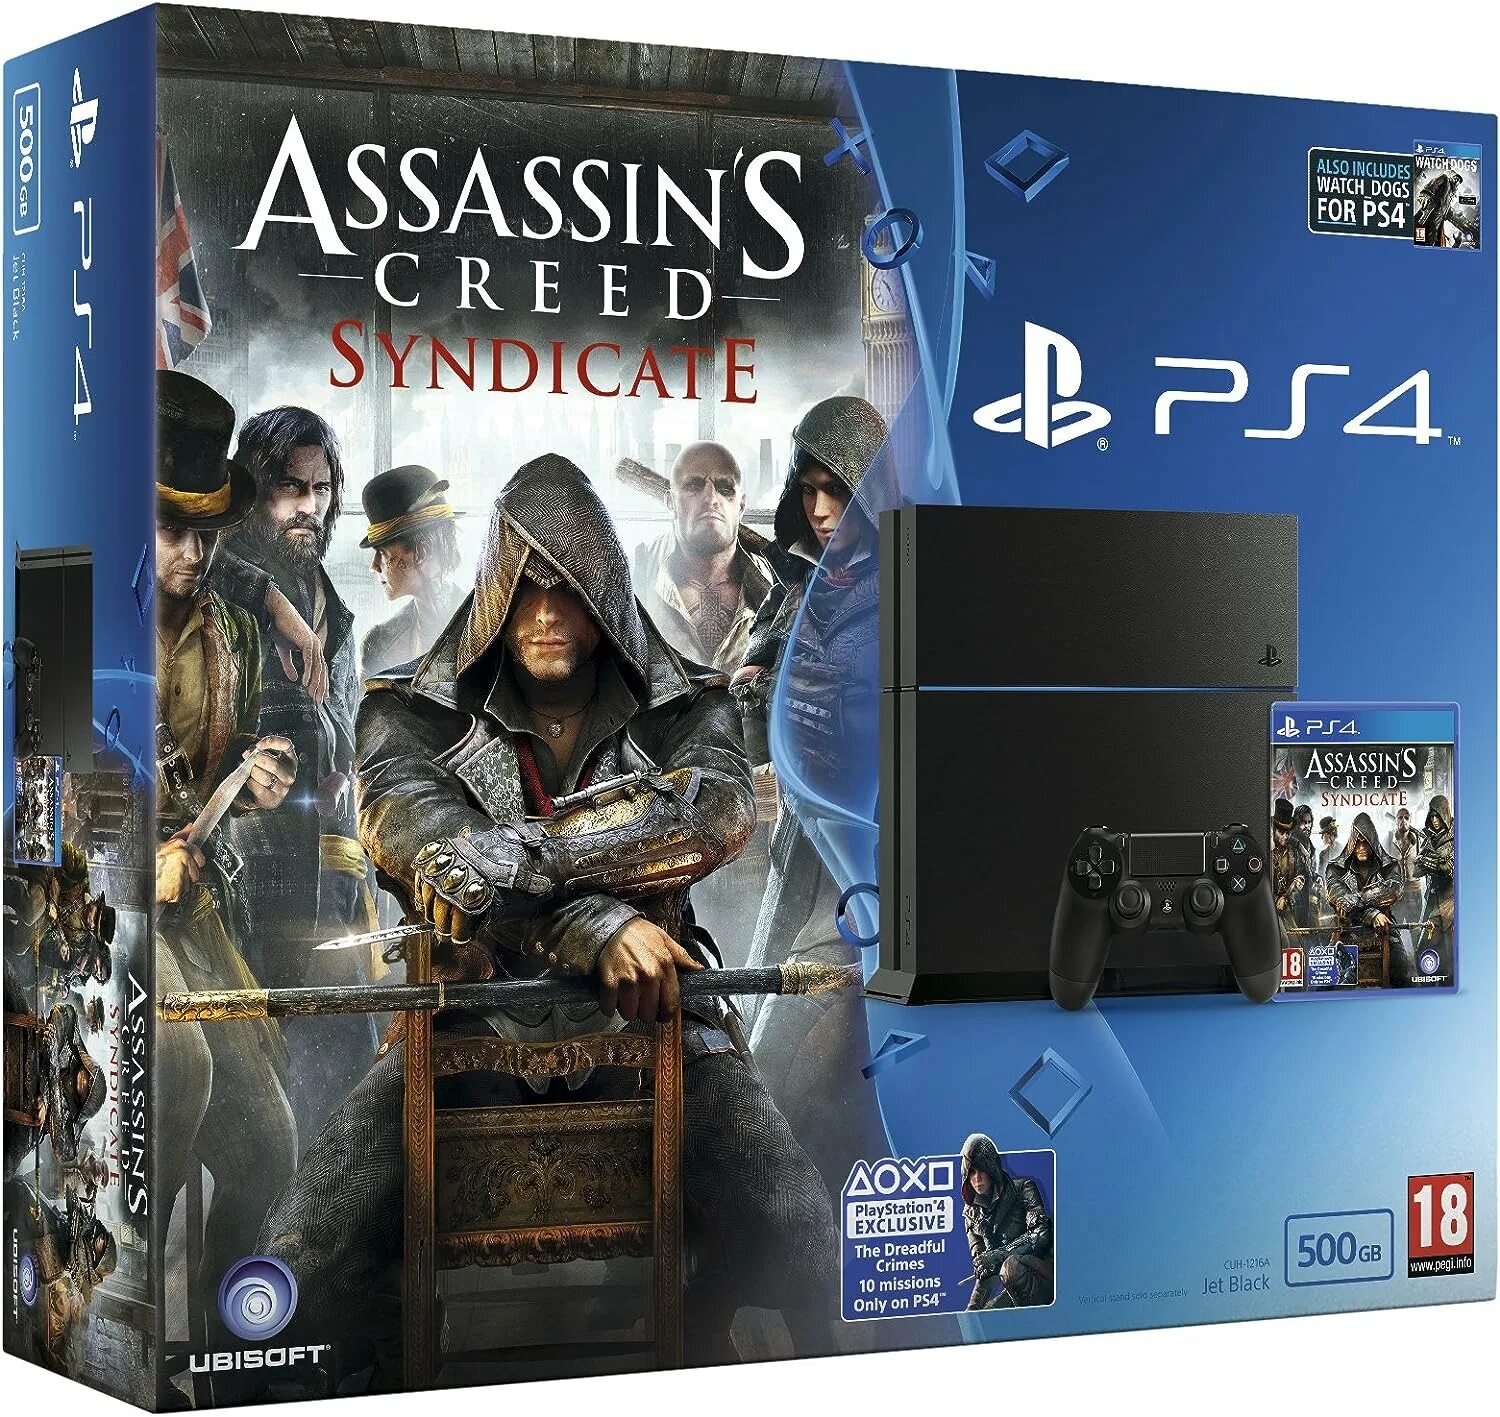 Playstation 4 игры обзоры. Ps4 диск Assassins Creed 1. PLAYSTATION 4 диски ассасин 2. Ассасин Крид Синдикат диск ПС 4. Assassin's Creed Синдикат ps4 диск.